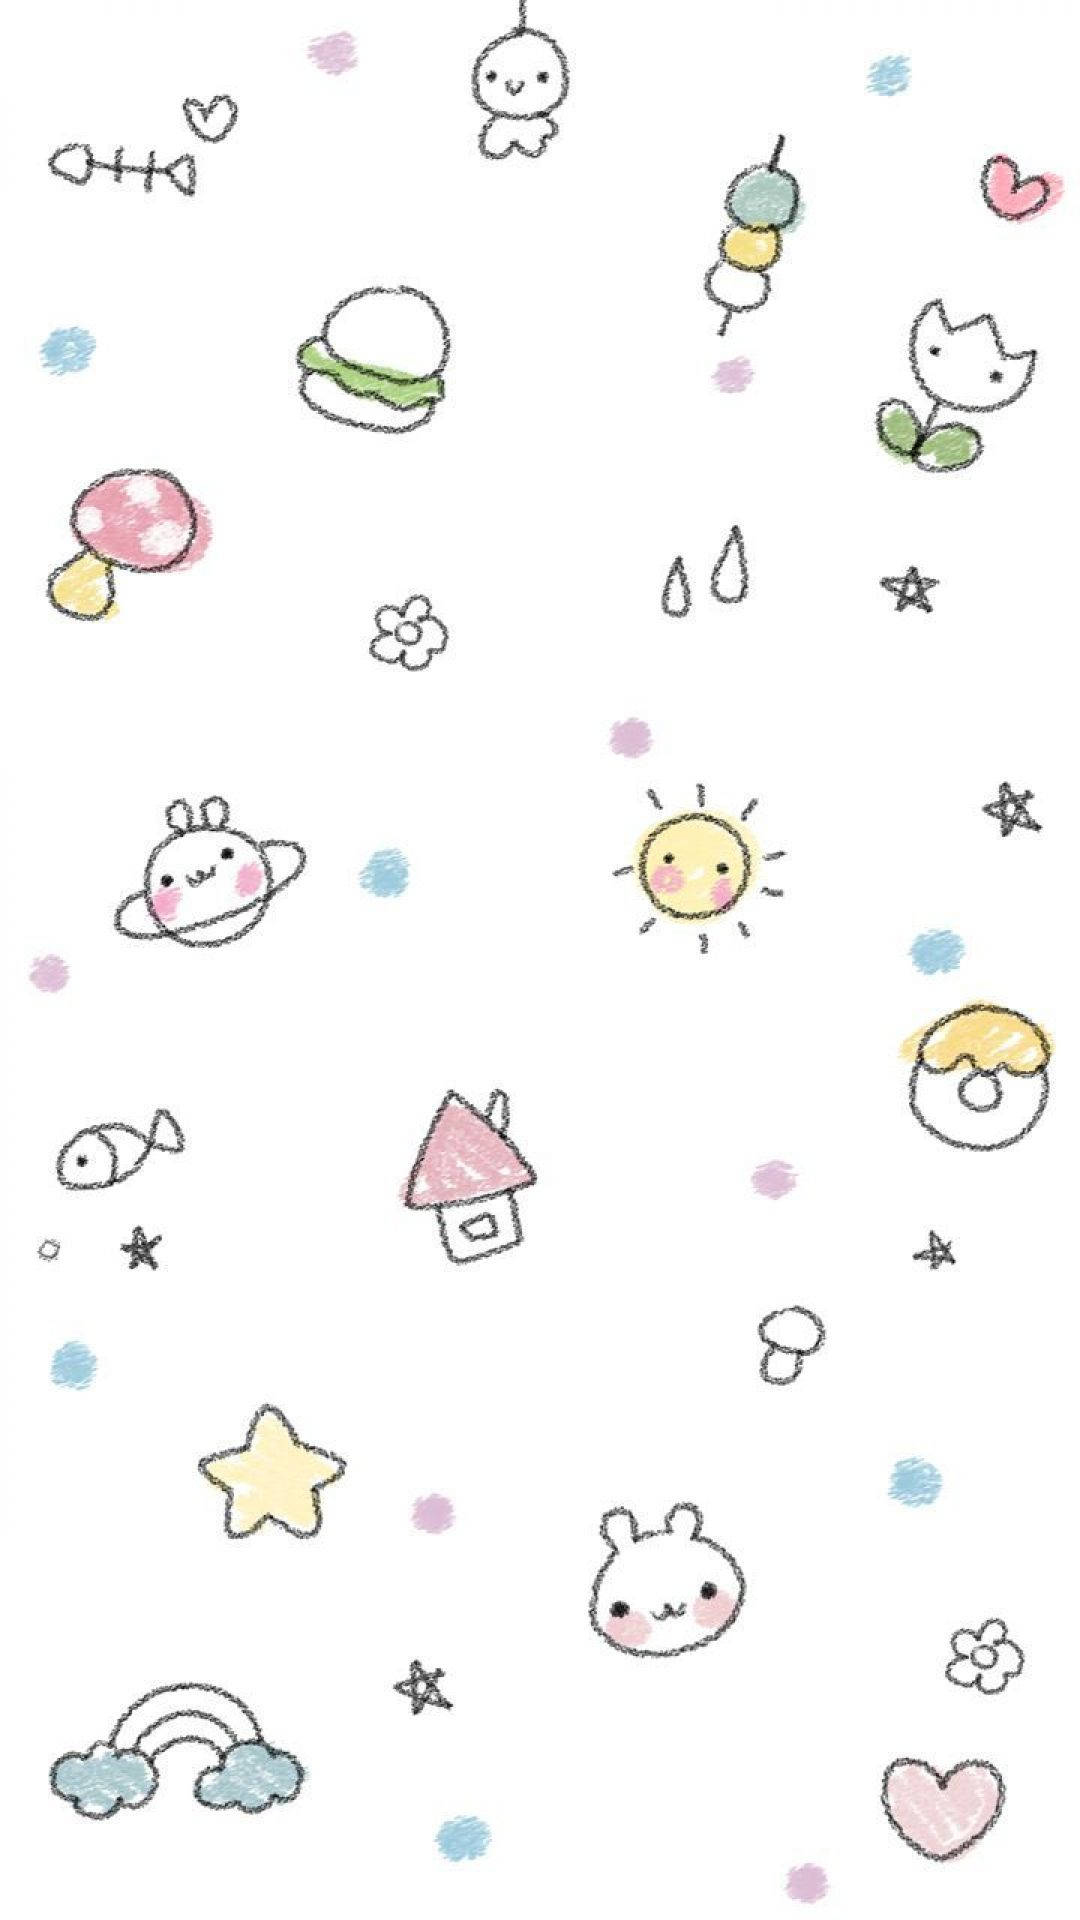 Get Funky This Summer With This Super Cute And Kawaii Aesthetic Wallpaper! Background